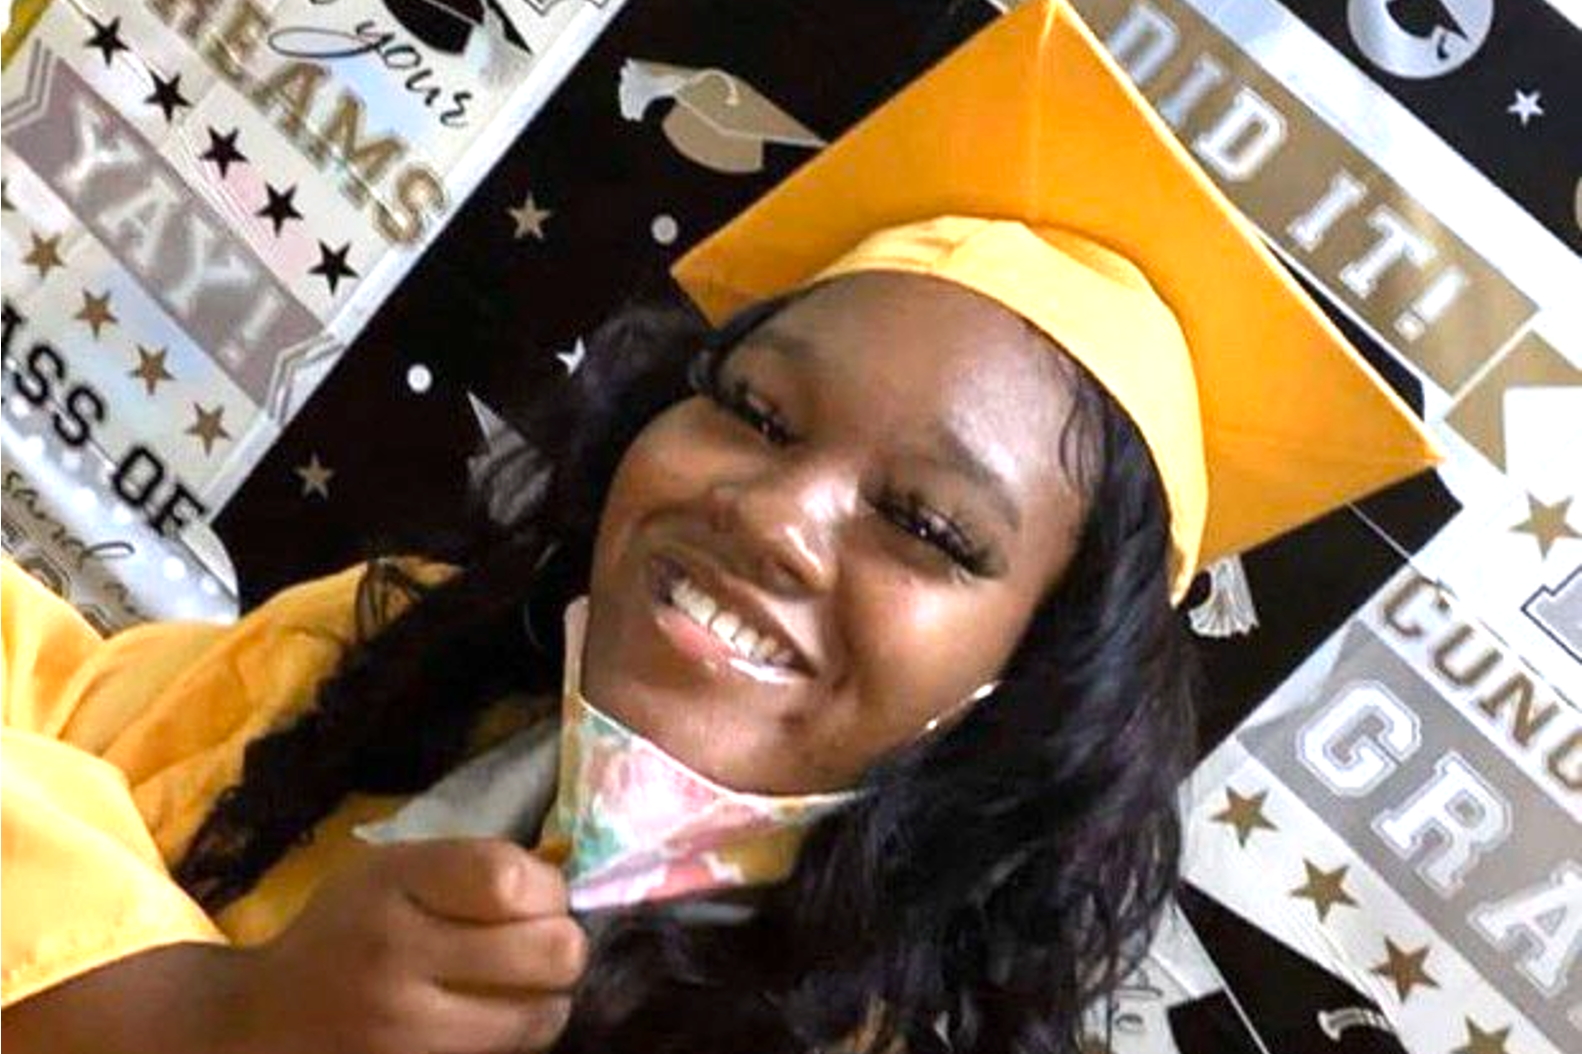 Na’kia Crawford: $50,000 Reward Offered For Information In Shooting Death Of Recent High School Graduate